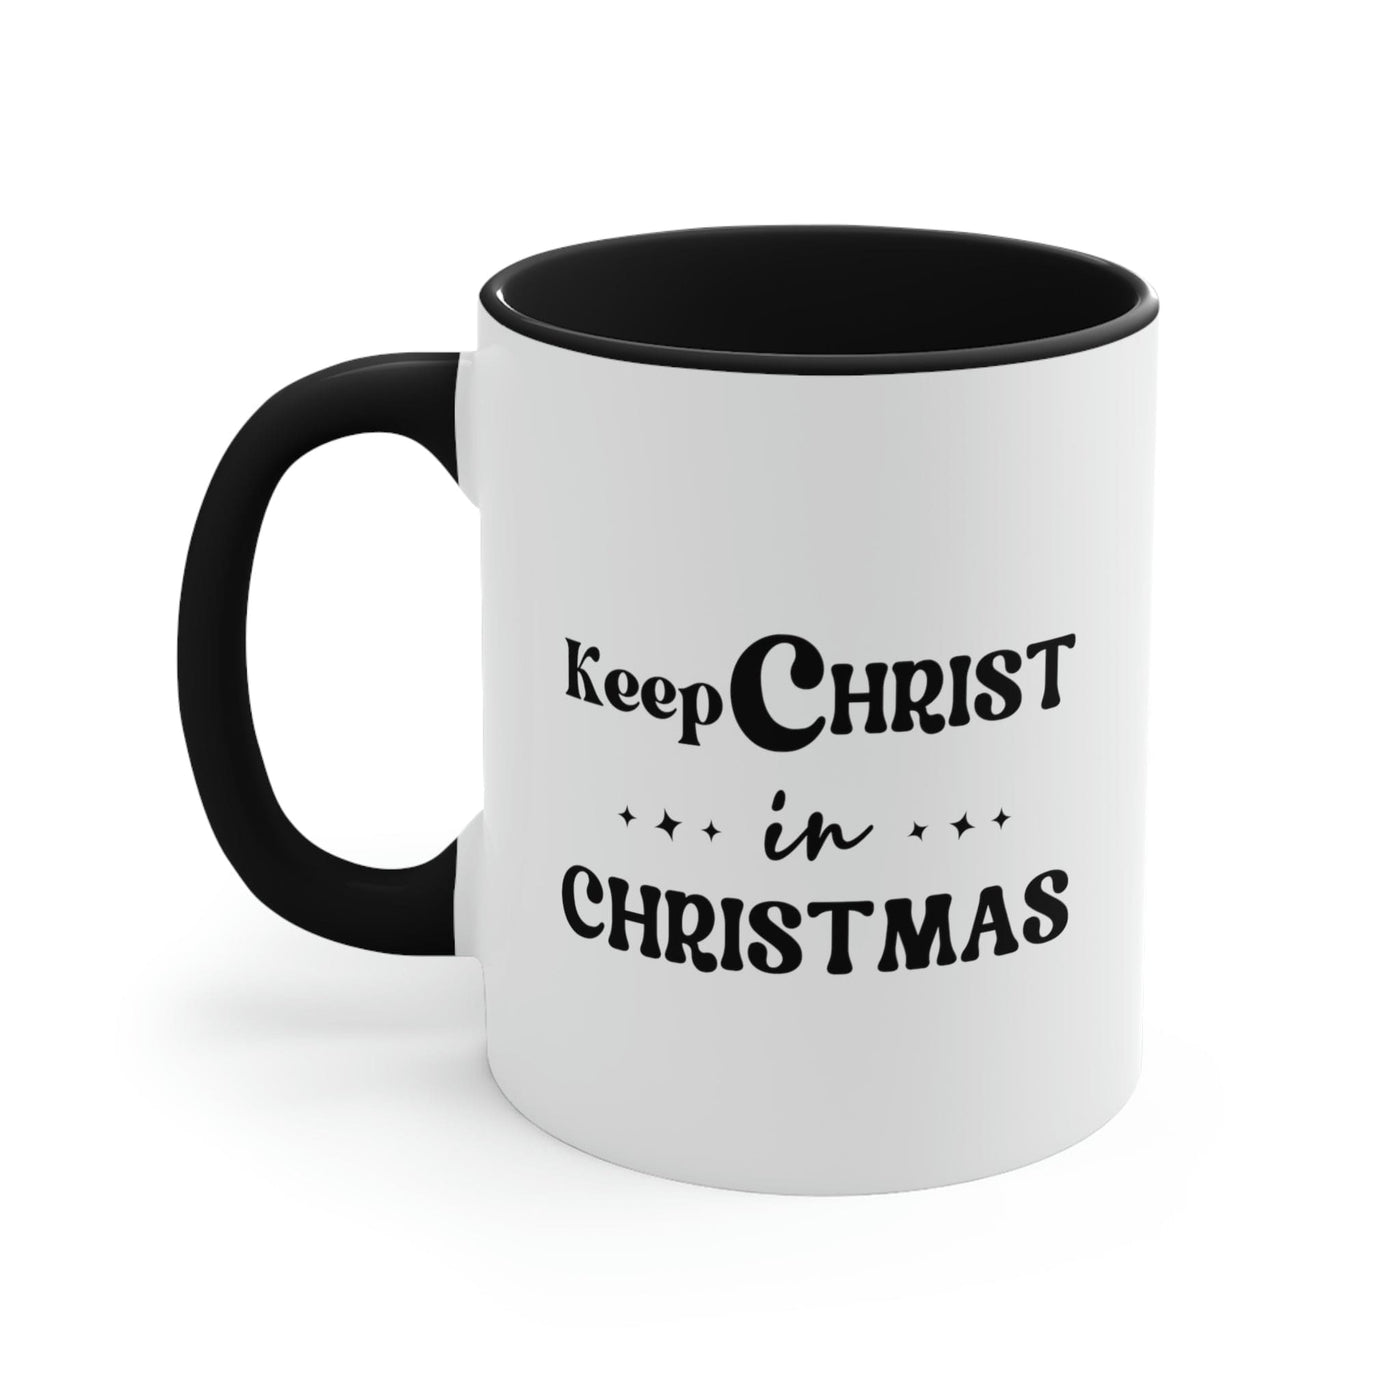 Two - tone Accent Ceramic Mug 11oz Keep Christ In Christmas Christian Holiday